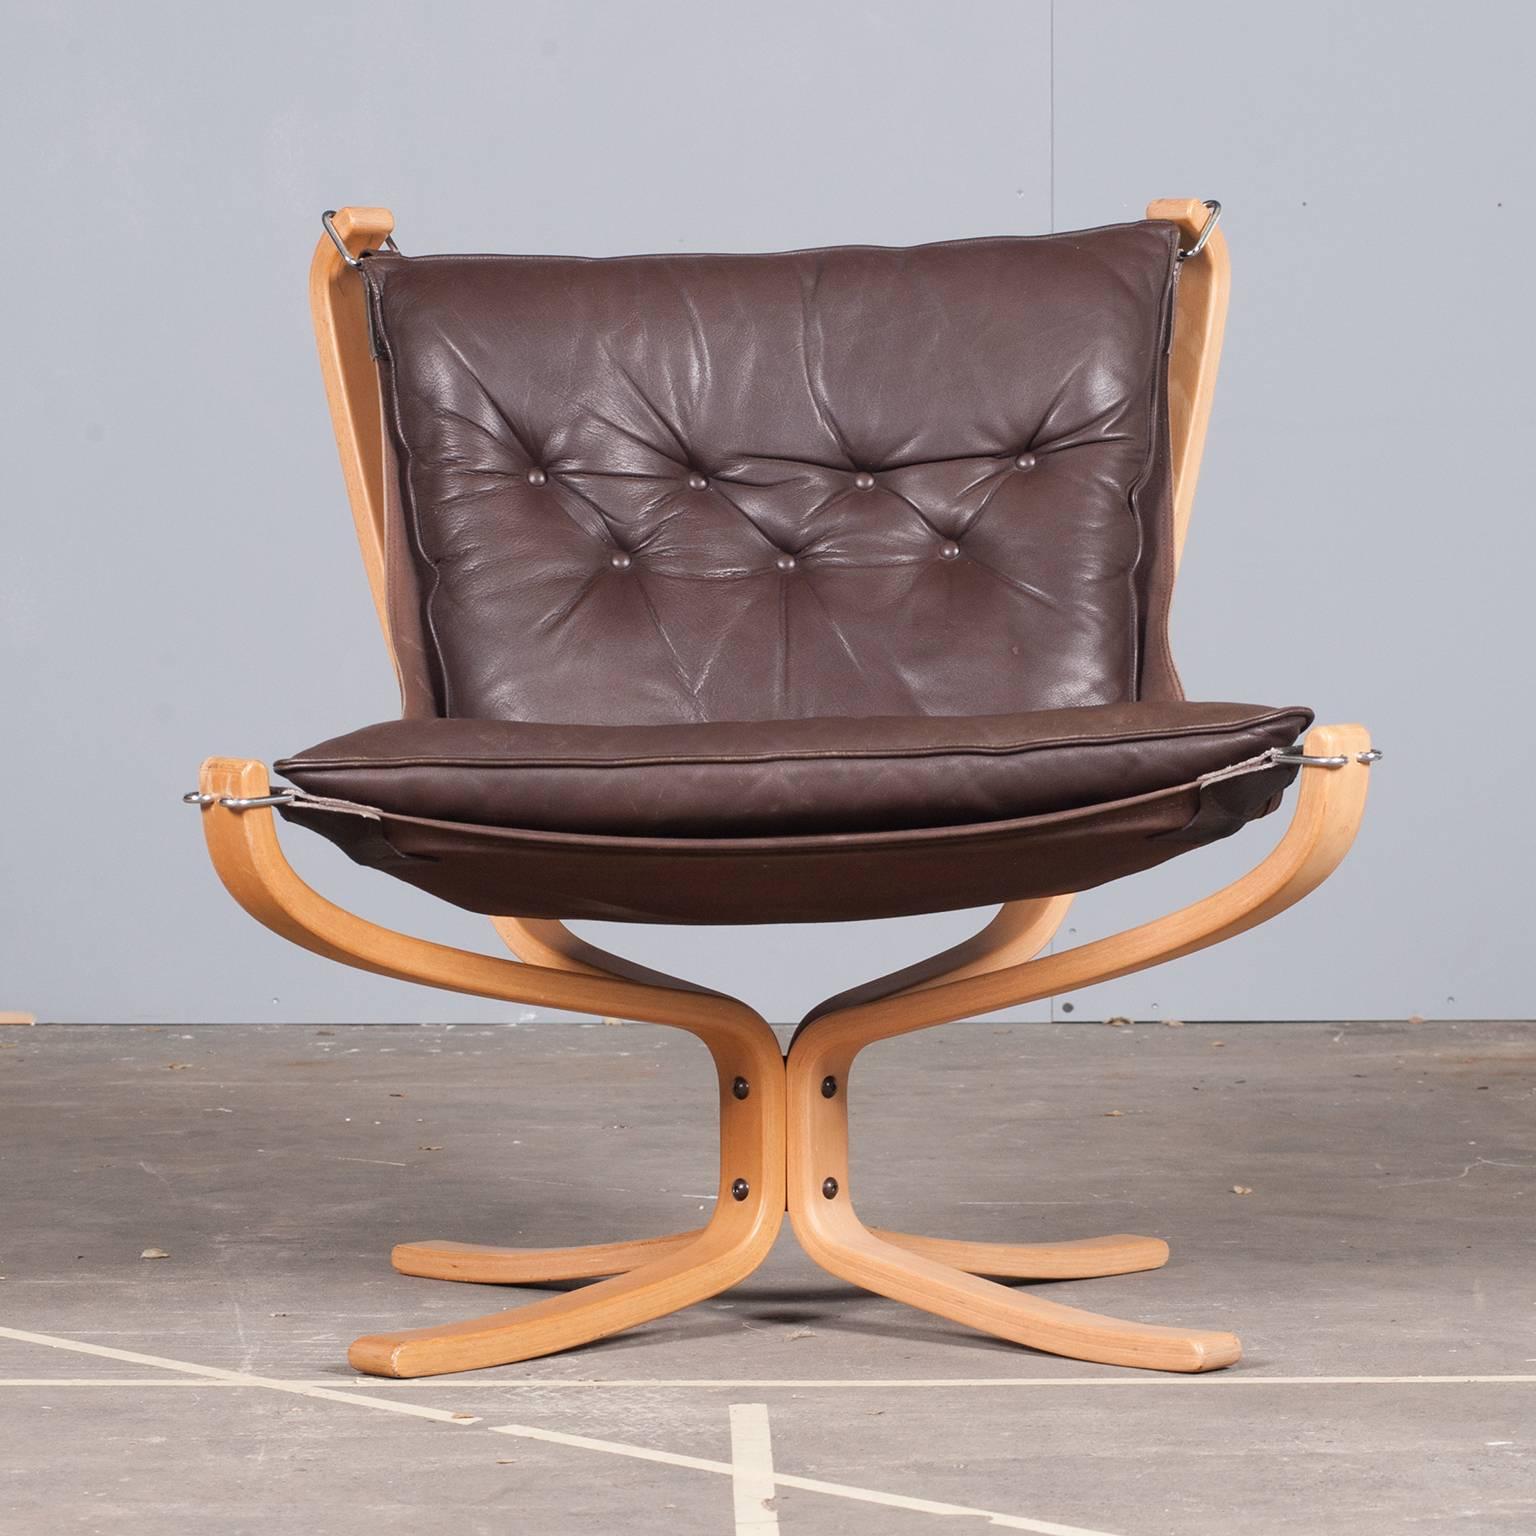 The Low Back Falcon Chair is an iconic Norwegian design piece. Originally designed in 1971 by Sigurd Ressel and manufactured by Vatne Mobler Norway. With a light-weight appearance, hammock style seat, vintage leather cushioning and sturdy contrast